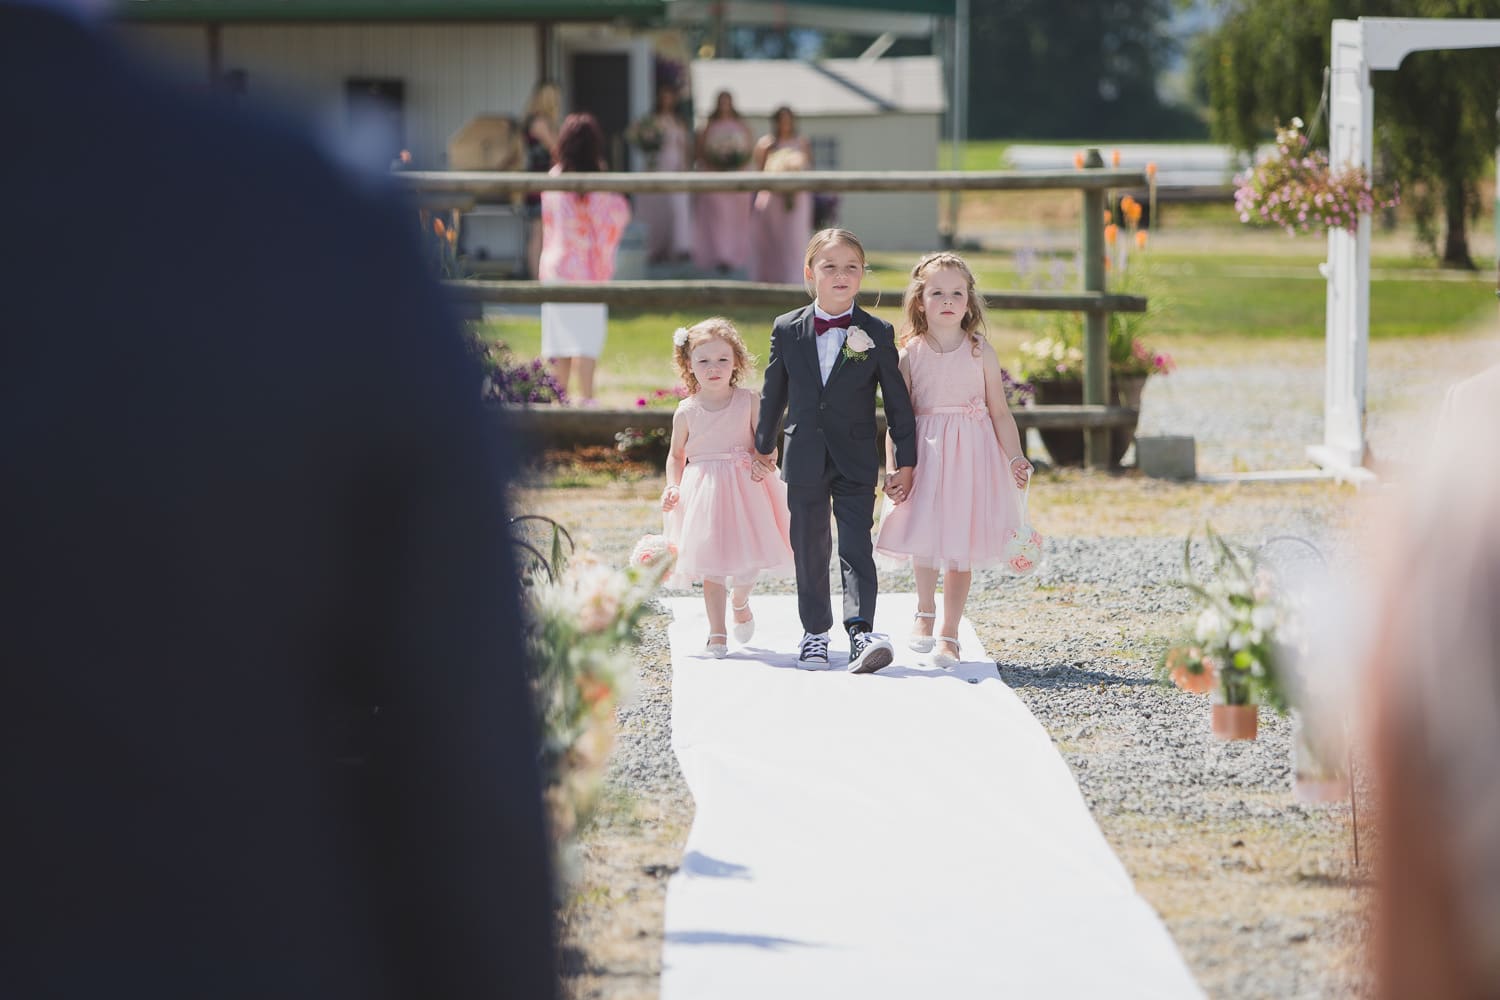 Cool flower kids and ring bearer at pitt meadows fraser valley wedding ceremony